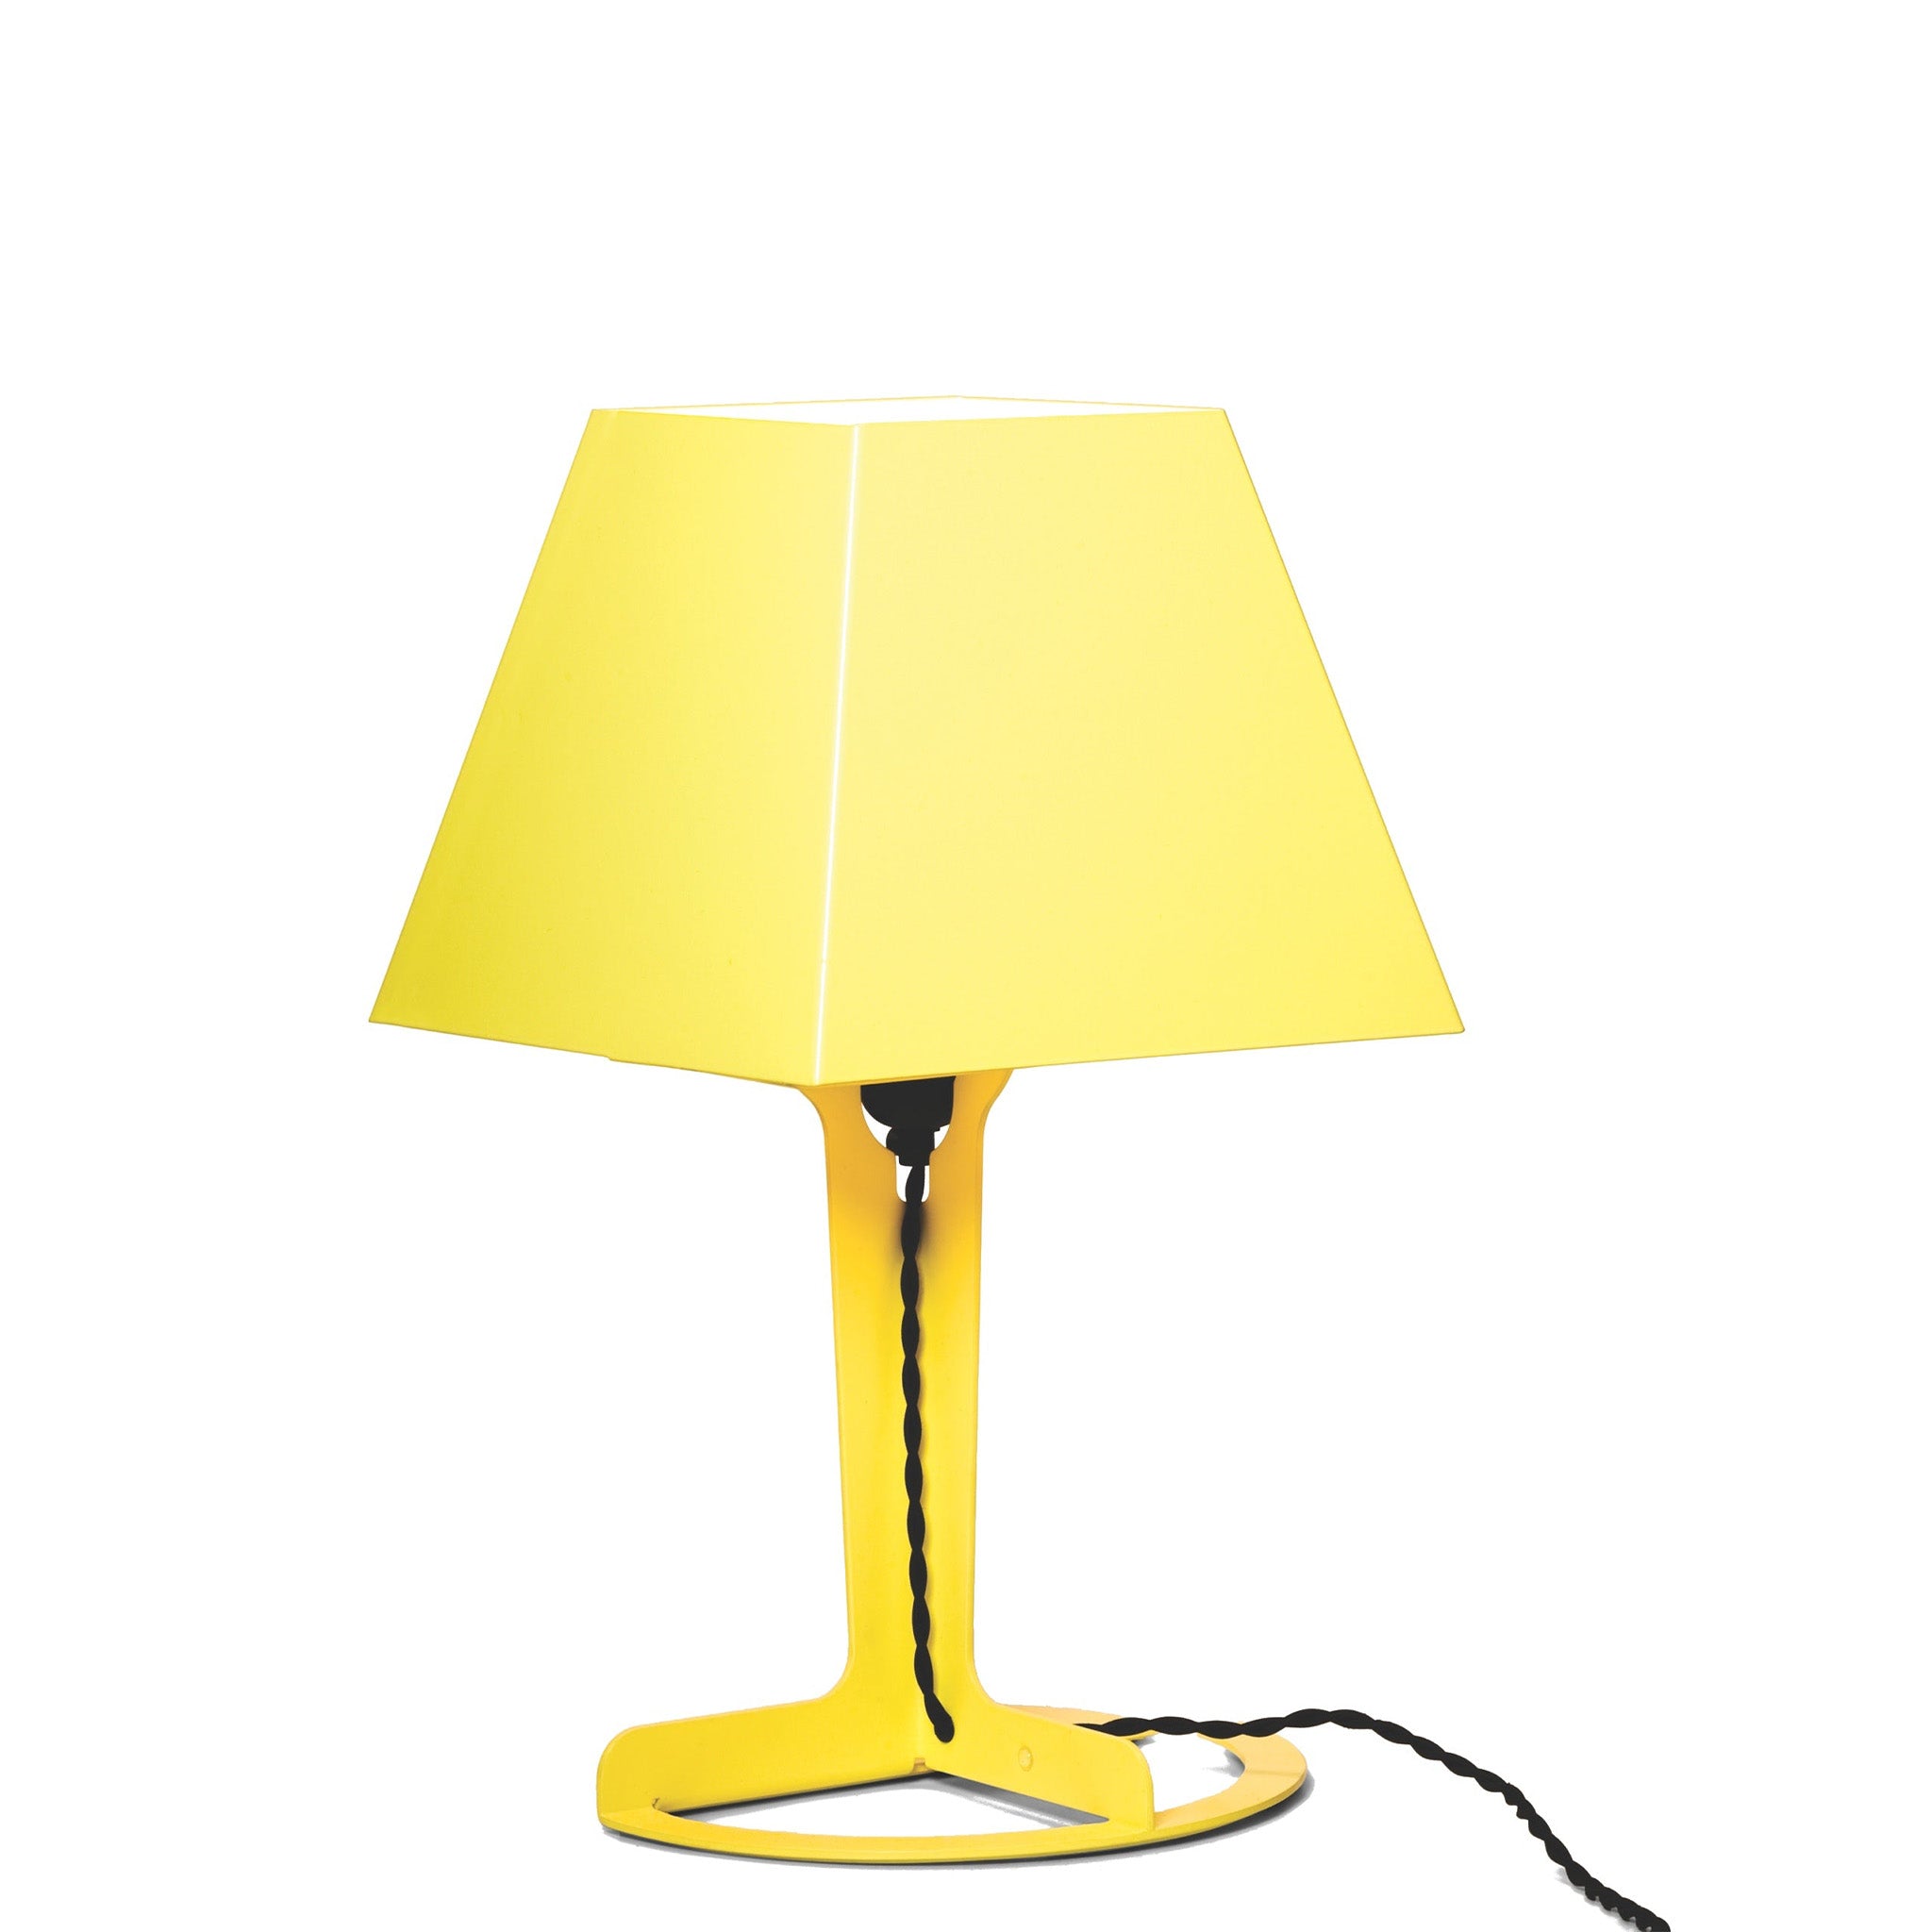 Clearance Fold T1 Table Lamp / Sulphur Yellow / Black by Established & Sons